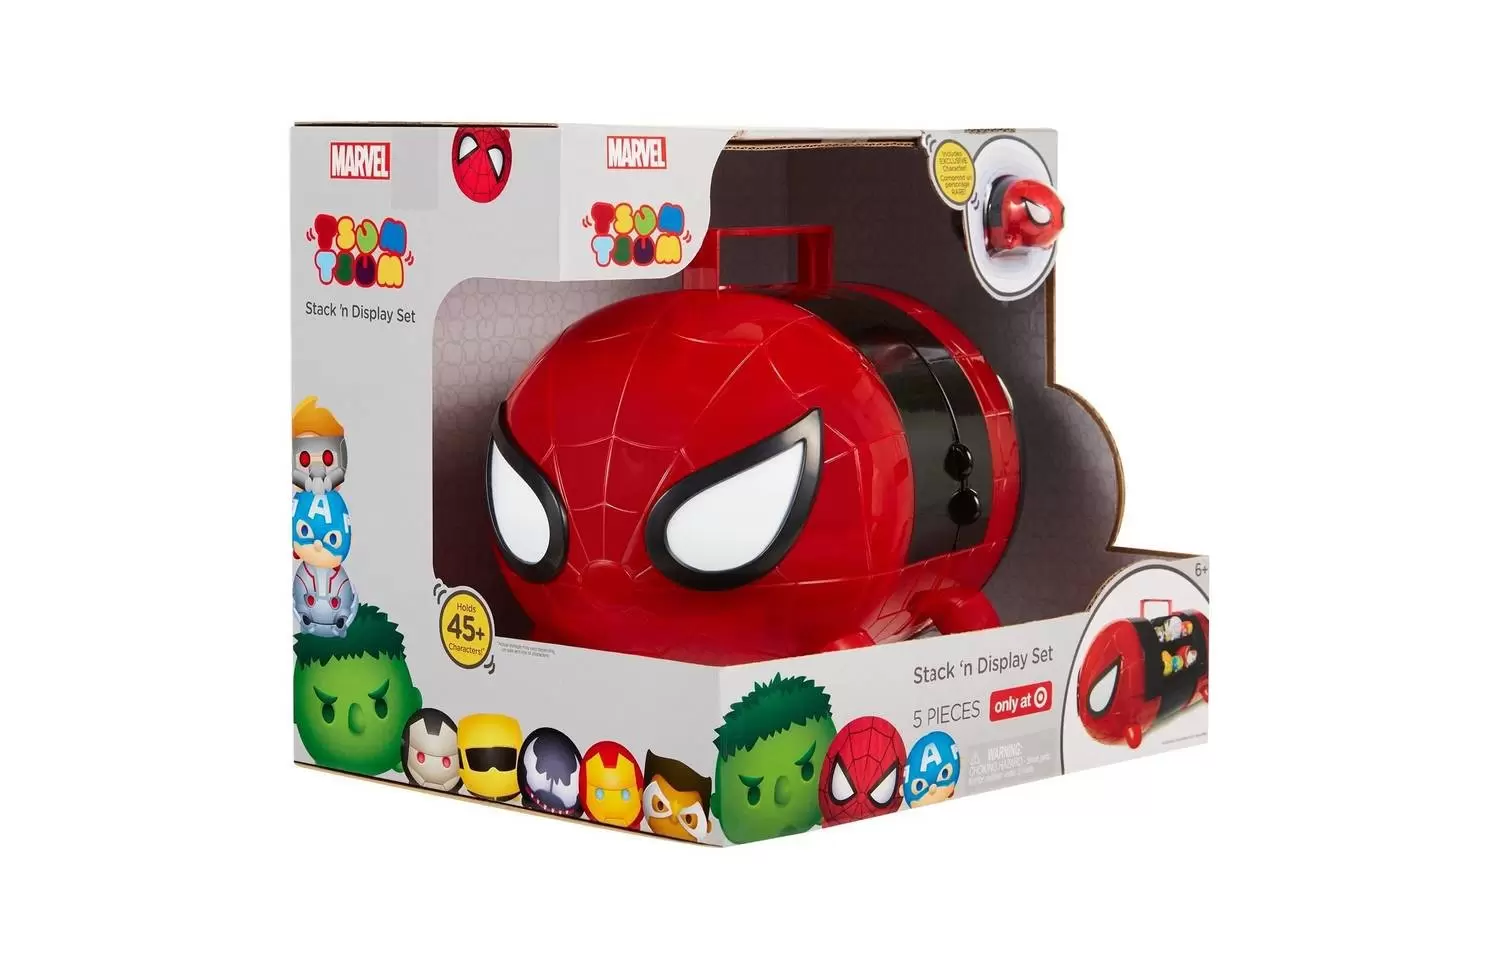 Tsum Tsum Jakks Pacific Exclusives And Sets - Spider-Man Black and Red Stack N Display Case